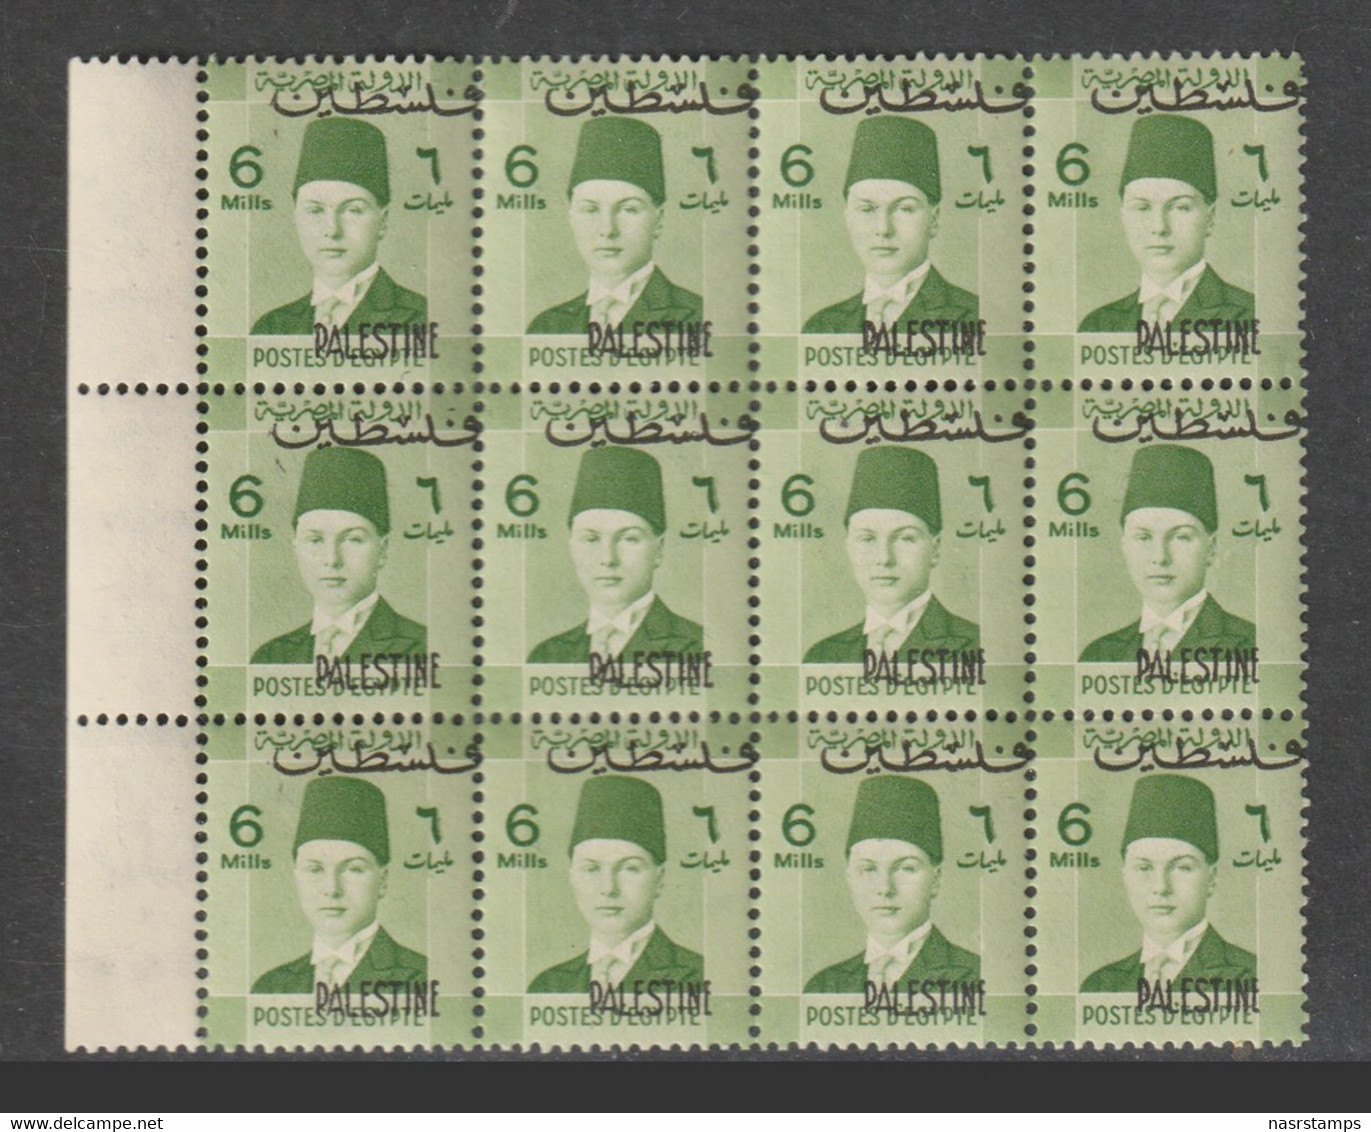 Egypt - 1948 - Block Of 12 - "Palestine" Shifted Horizontally - ( King Farouk - 6m - Over Printed Palestine ) - MNH** - Unused Stamps